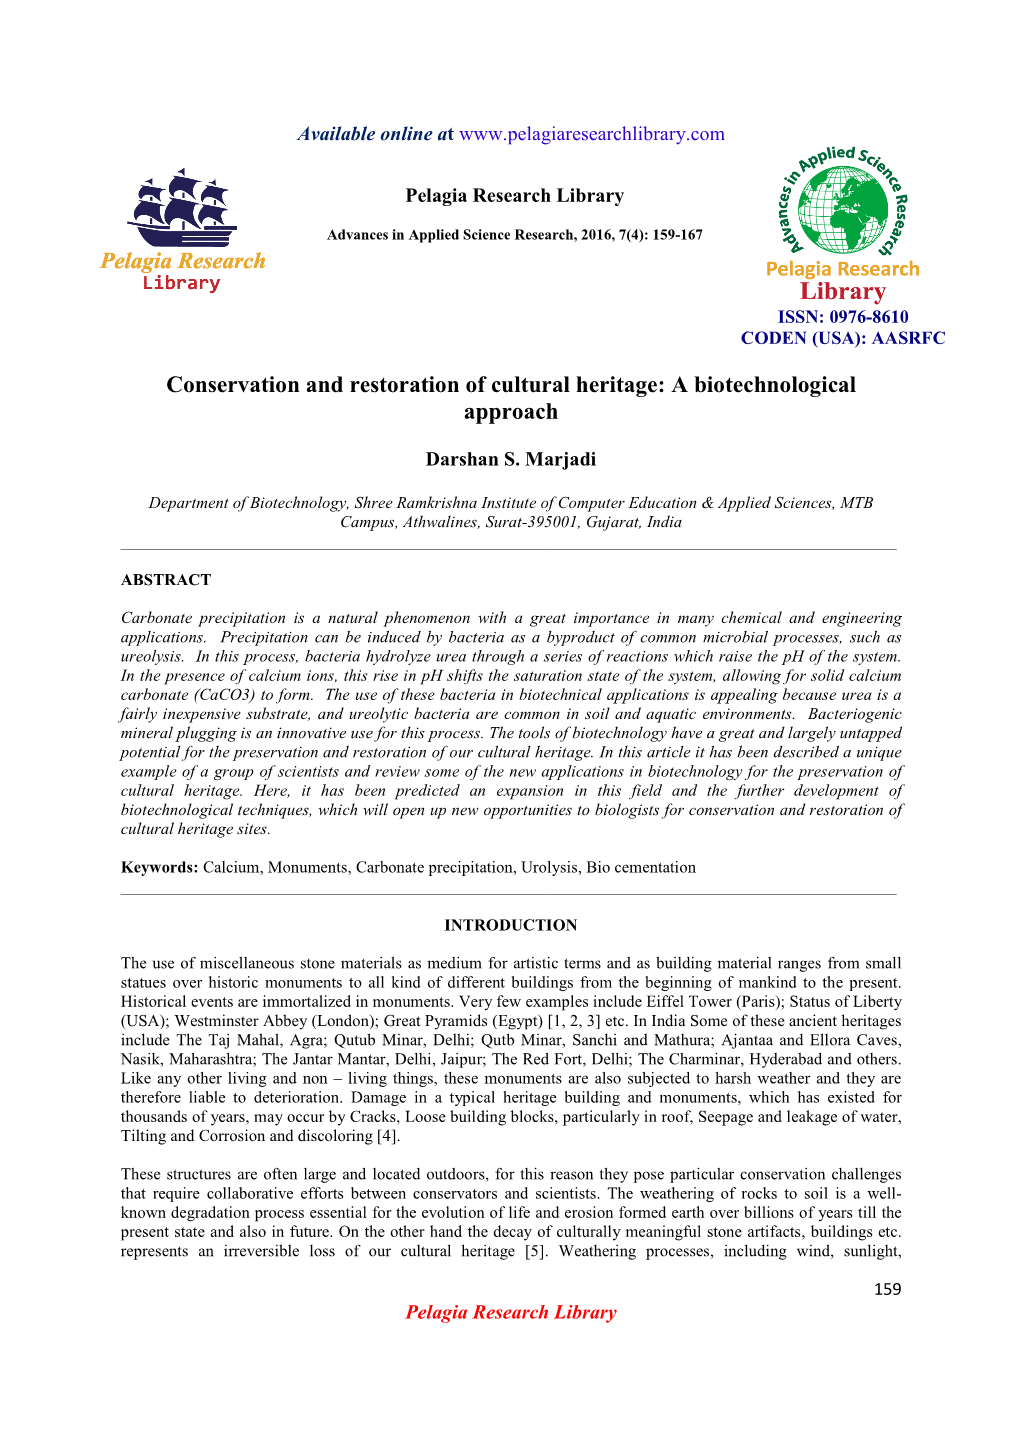 Conservation and Restoration of Cultural Heritage: a Biotechnological Approach